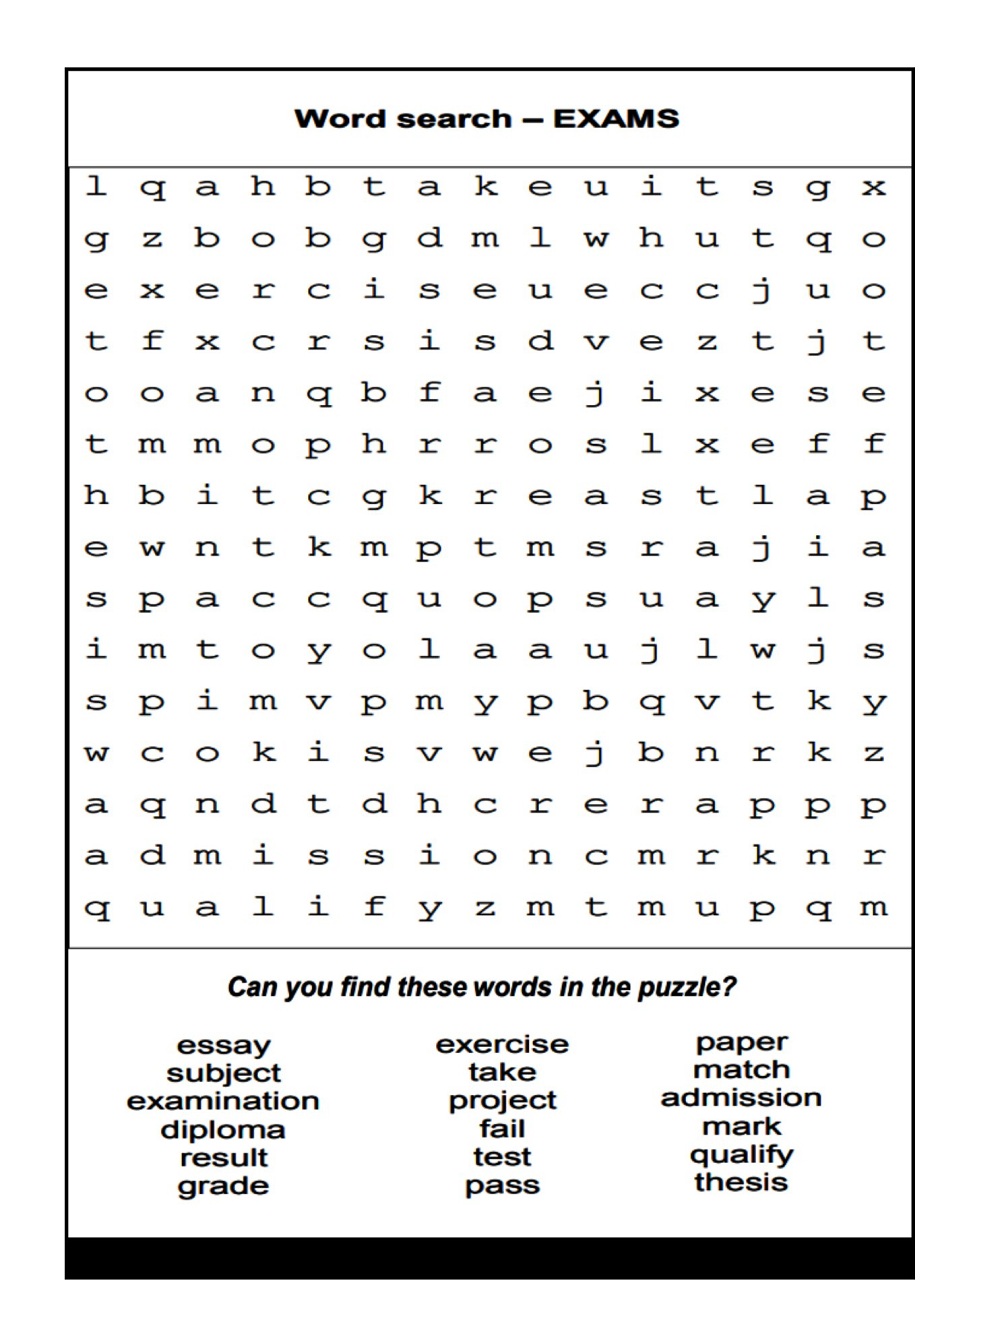 Exam Words Search Puzzle